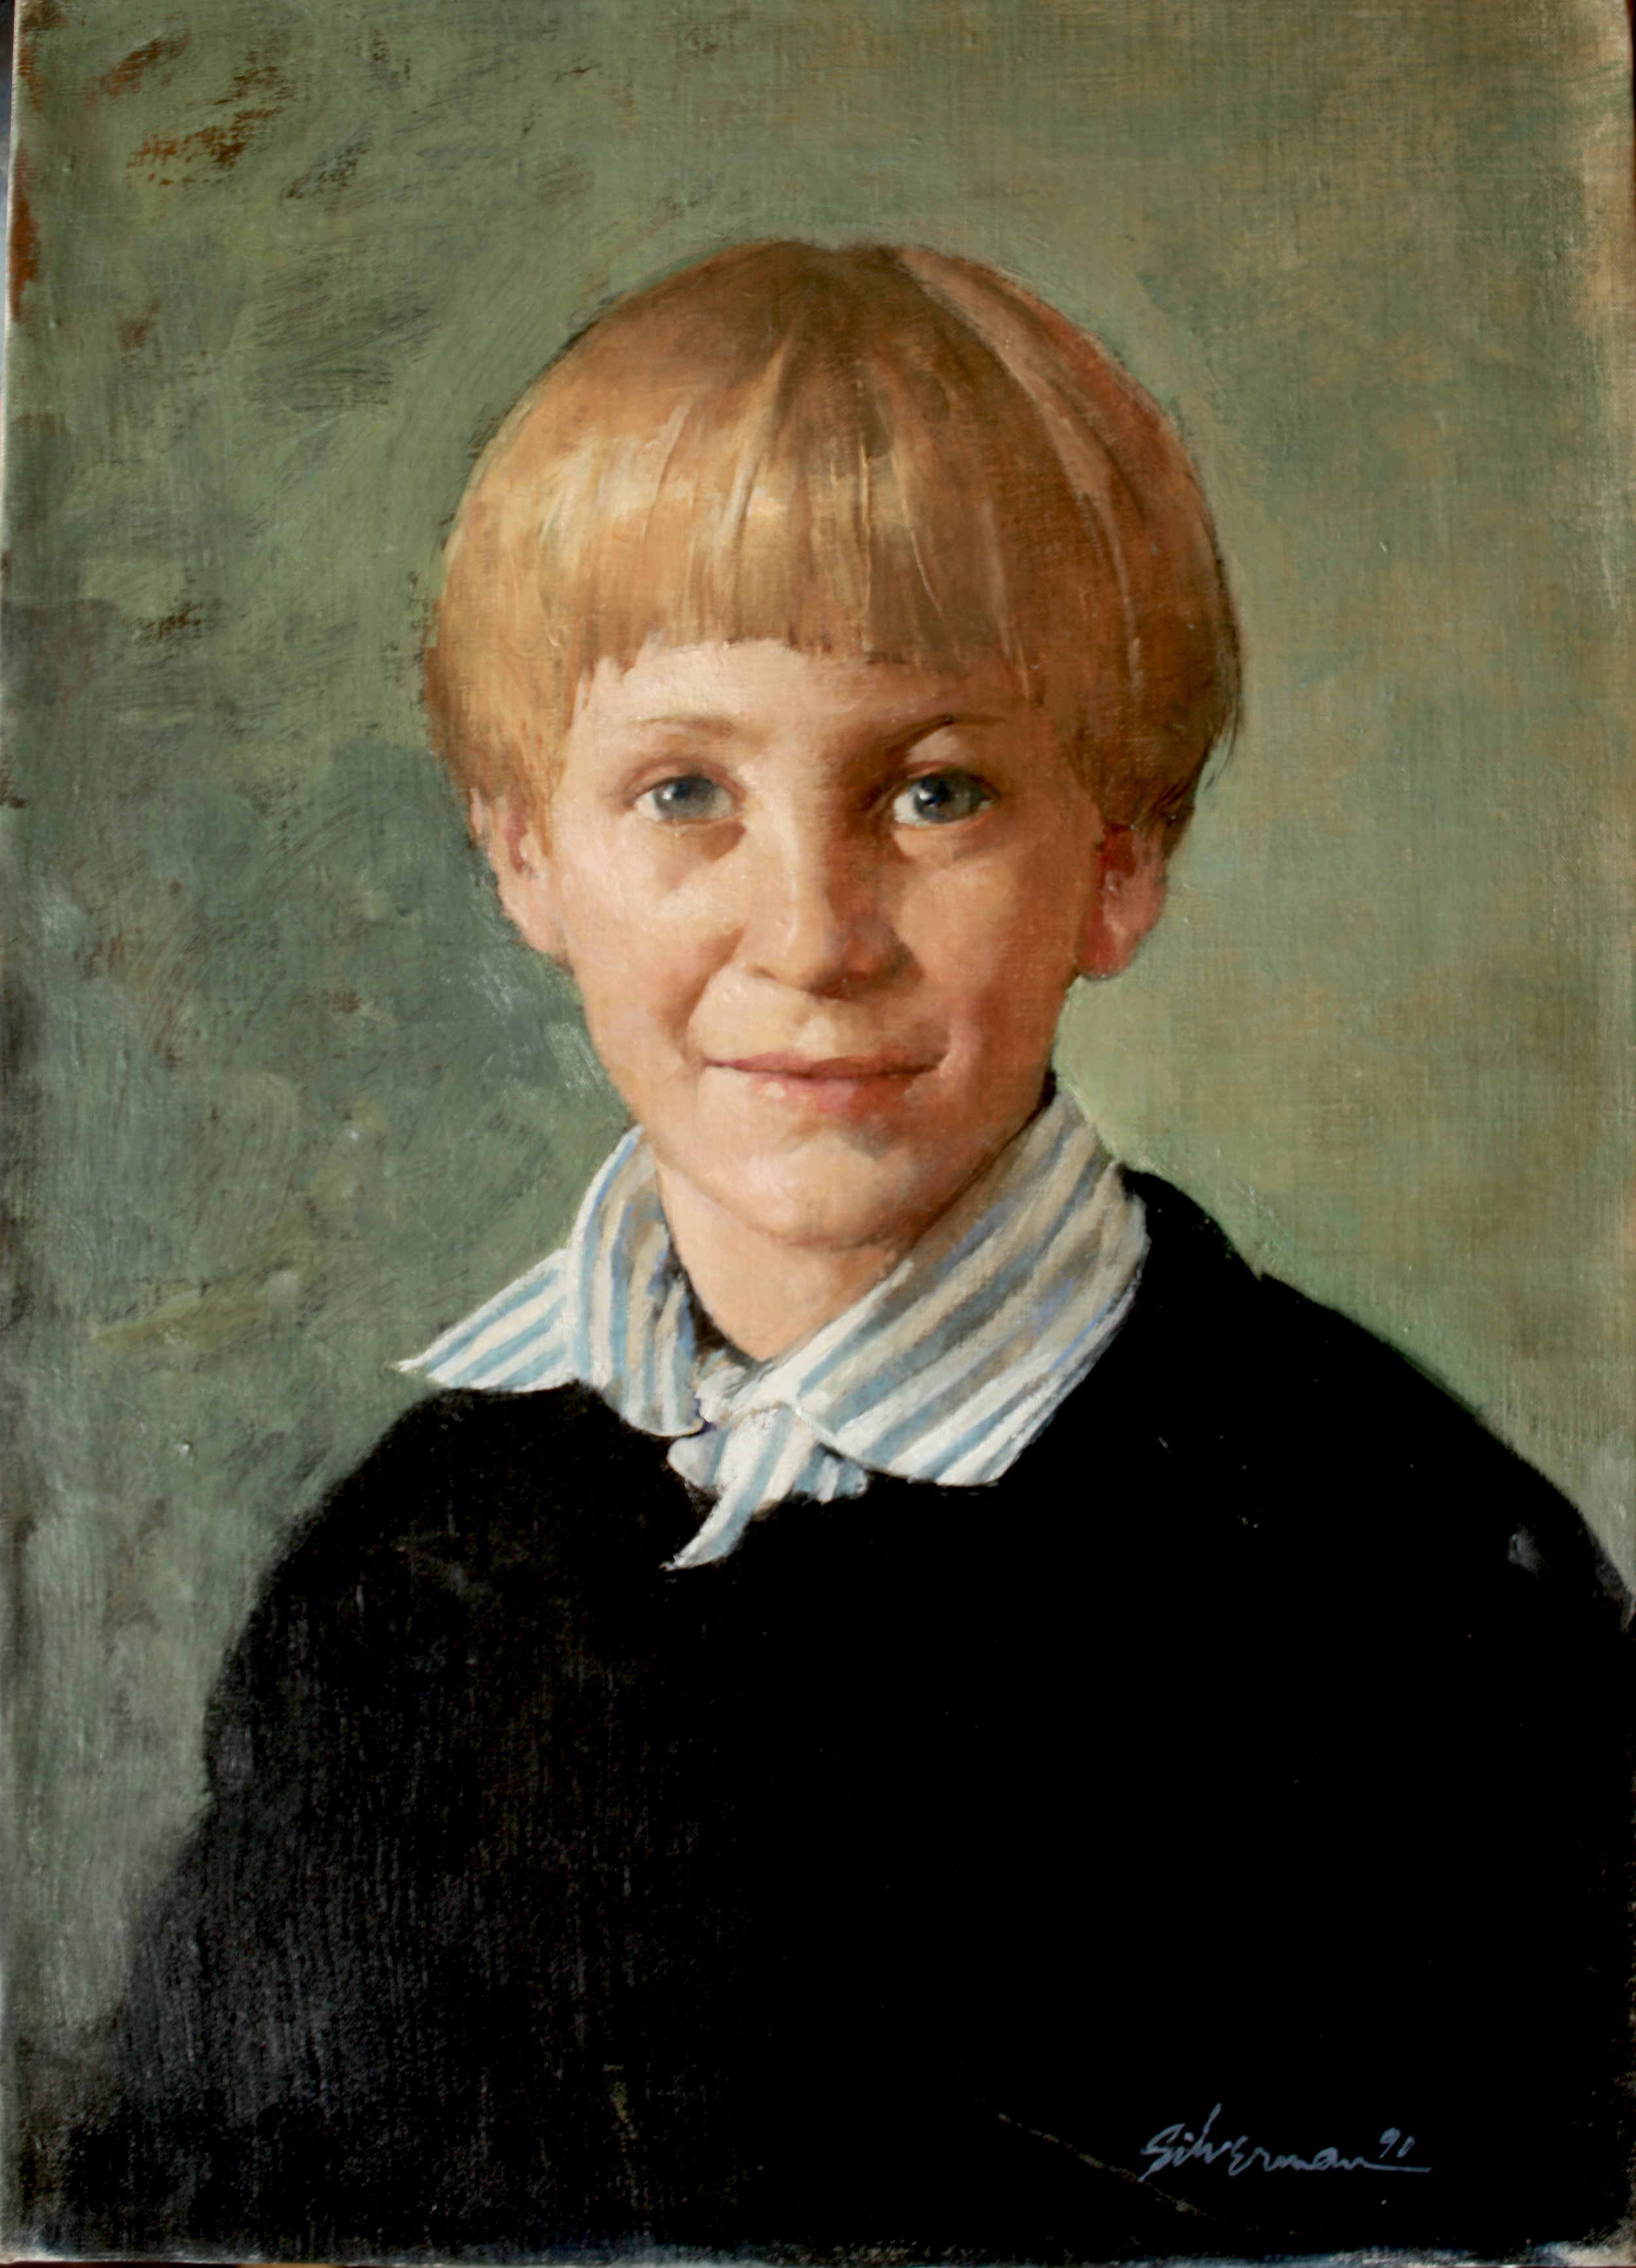 A Young Boy, 1998